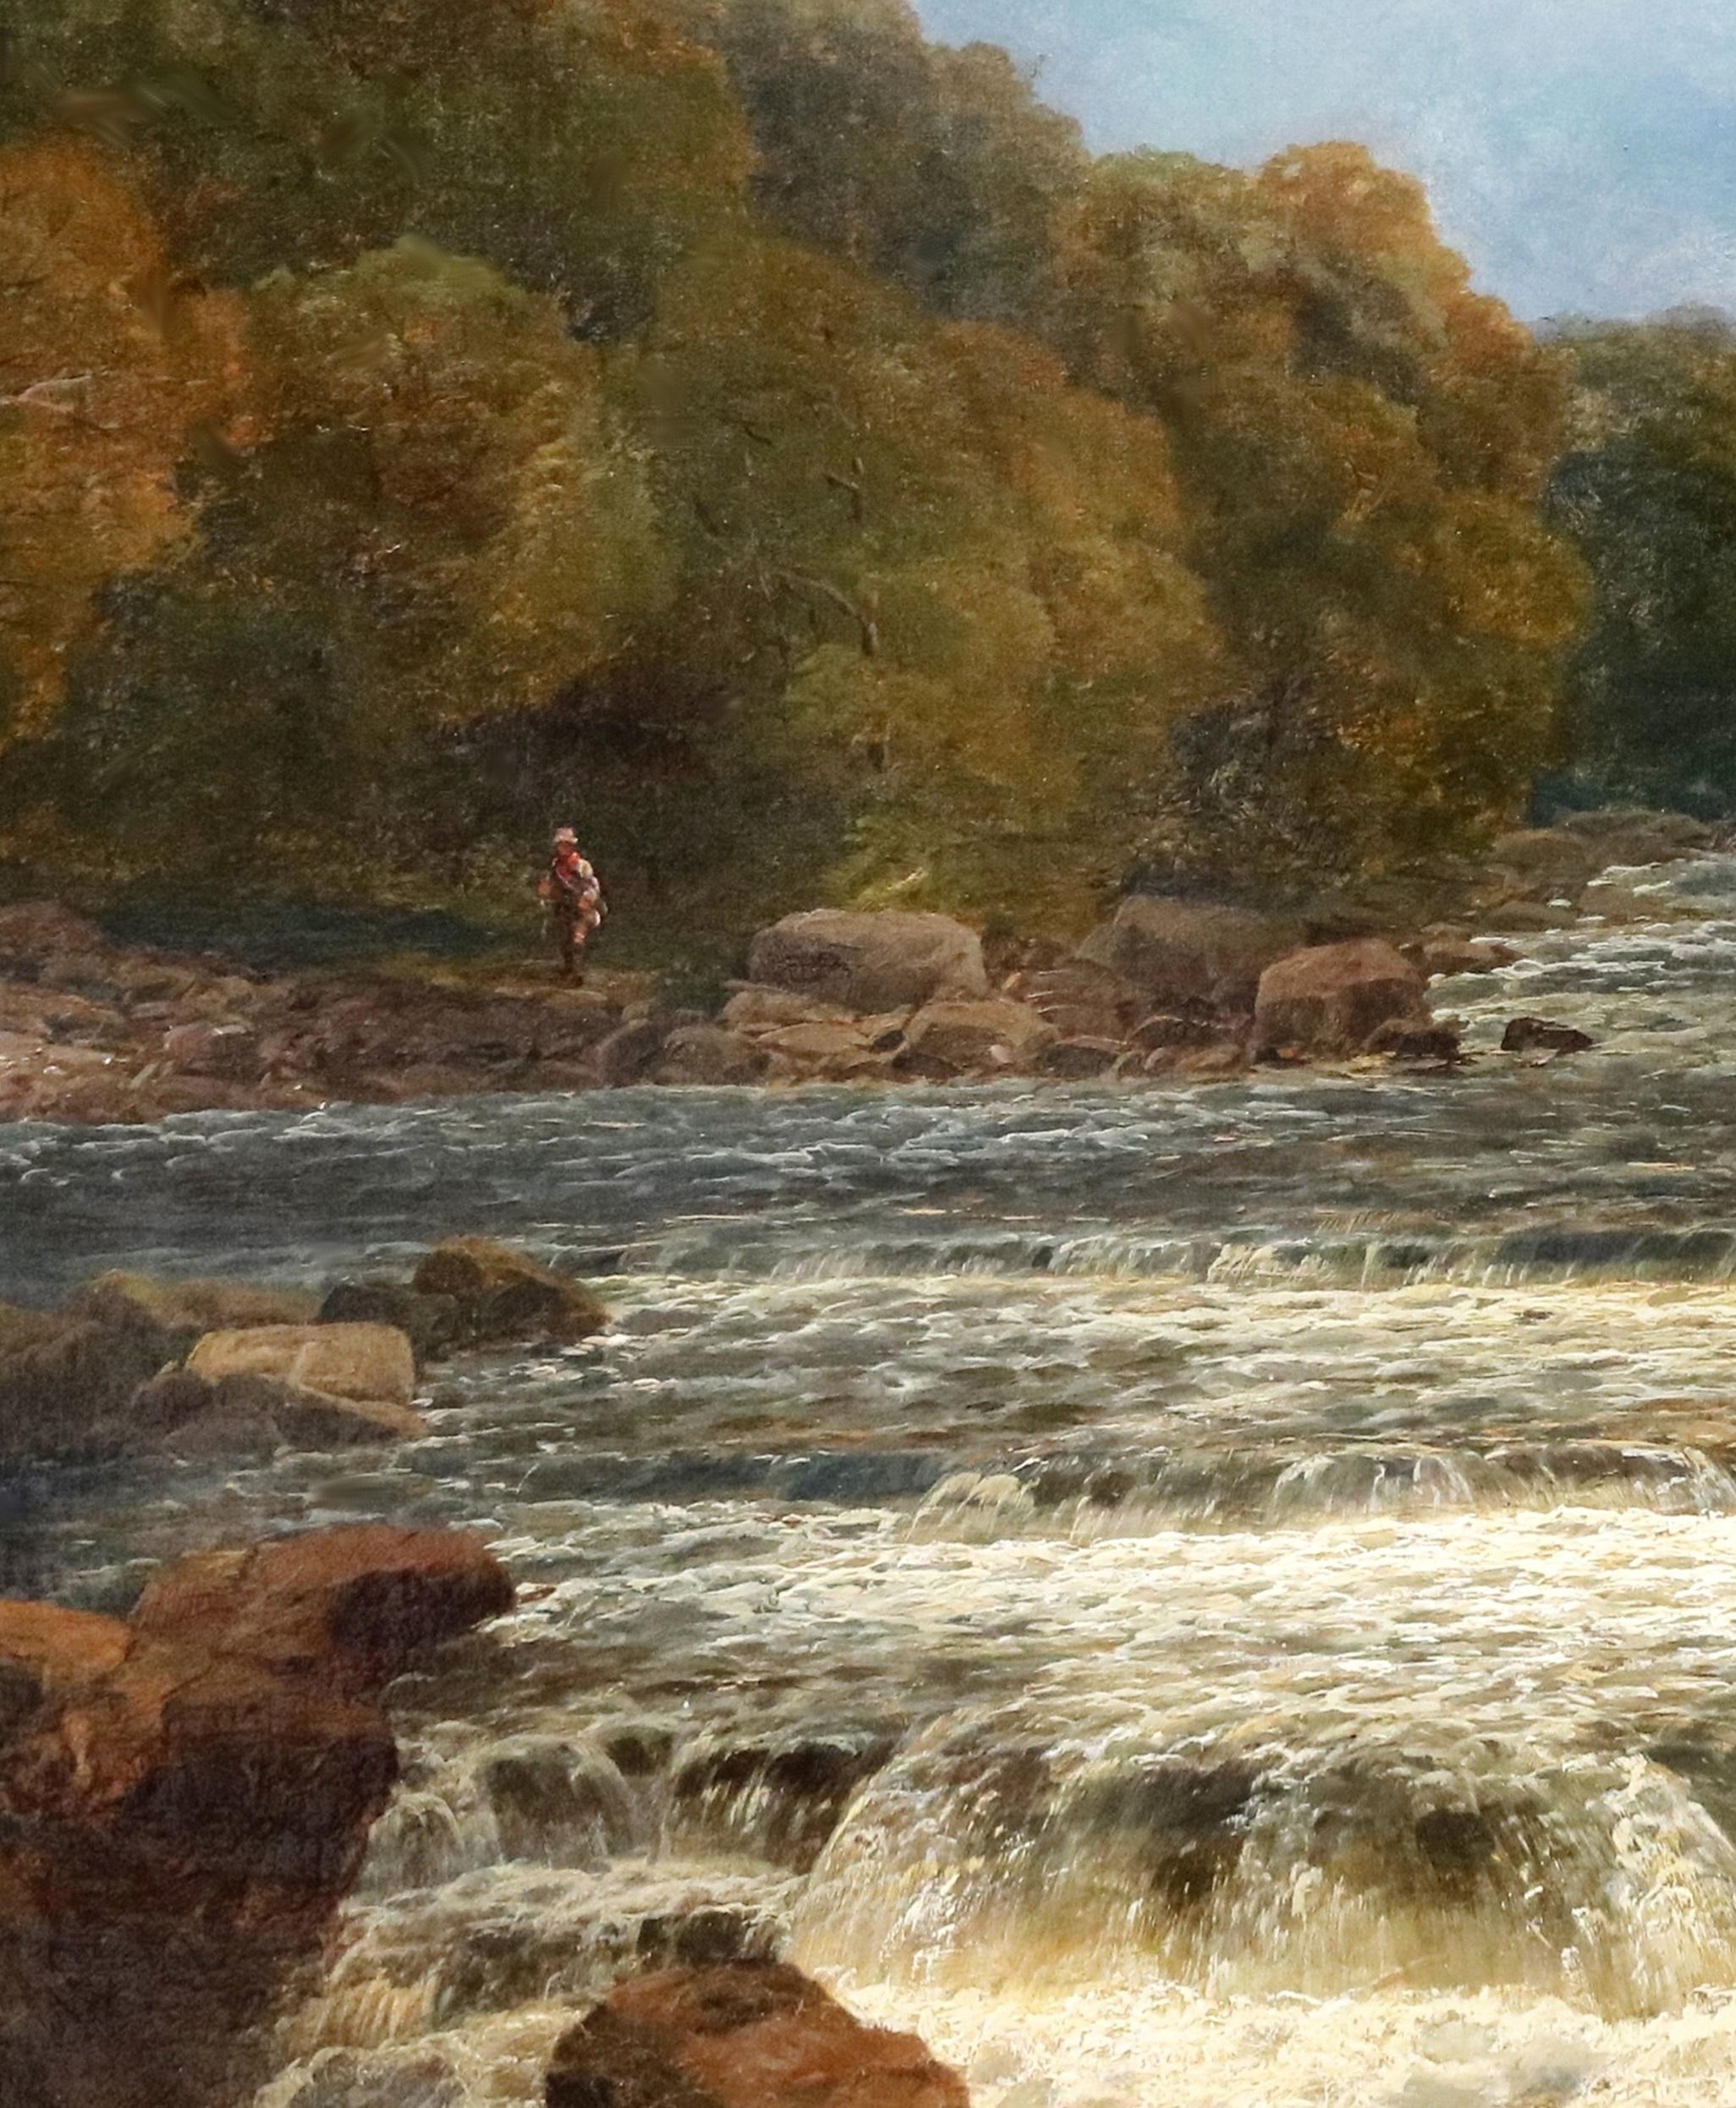 On the Dee, North Wales - 19th Century Landscape Oil Painting of Angler Fishing  - Brown Landscape Painting by John Brandon Smith